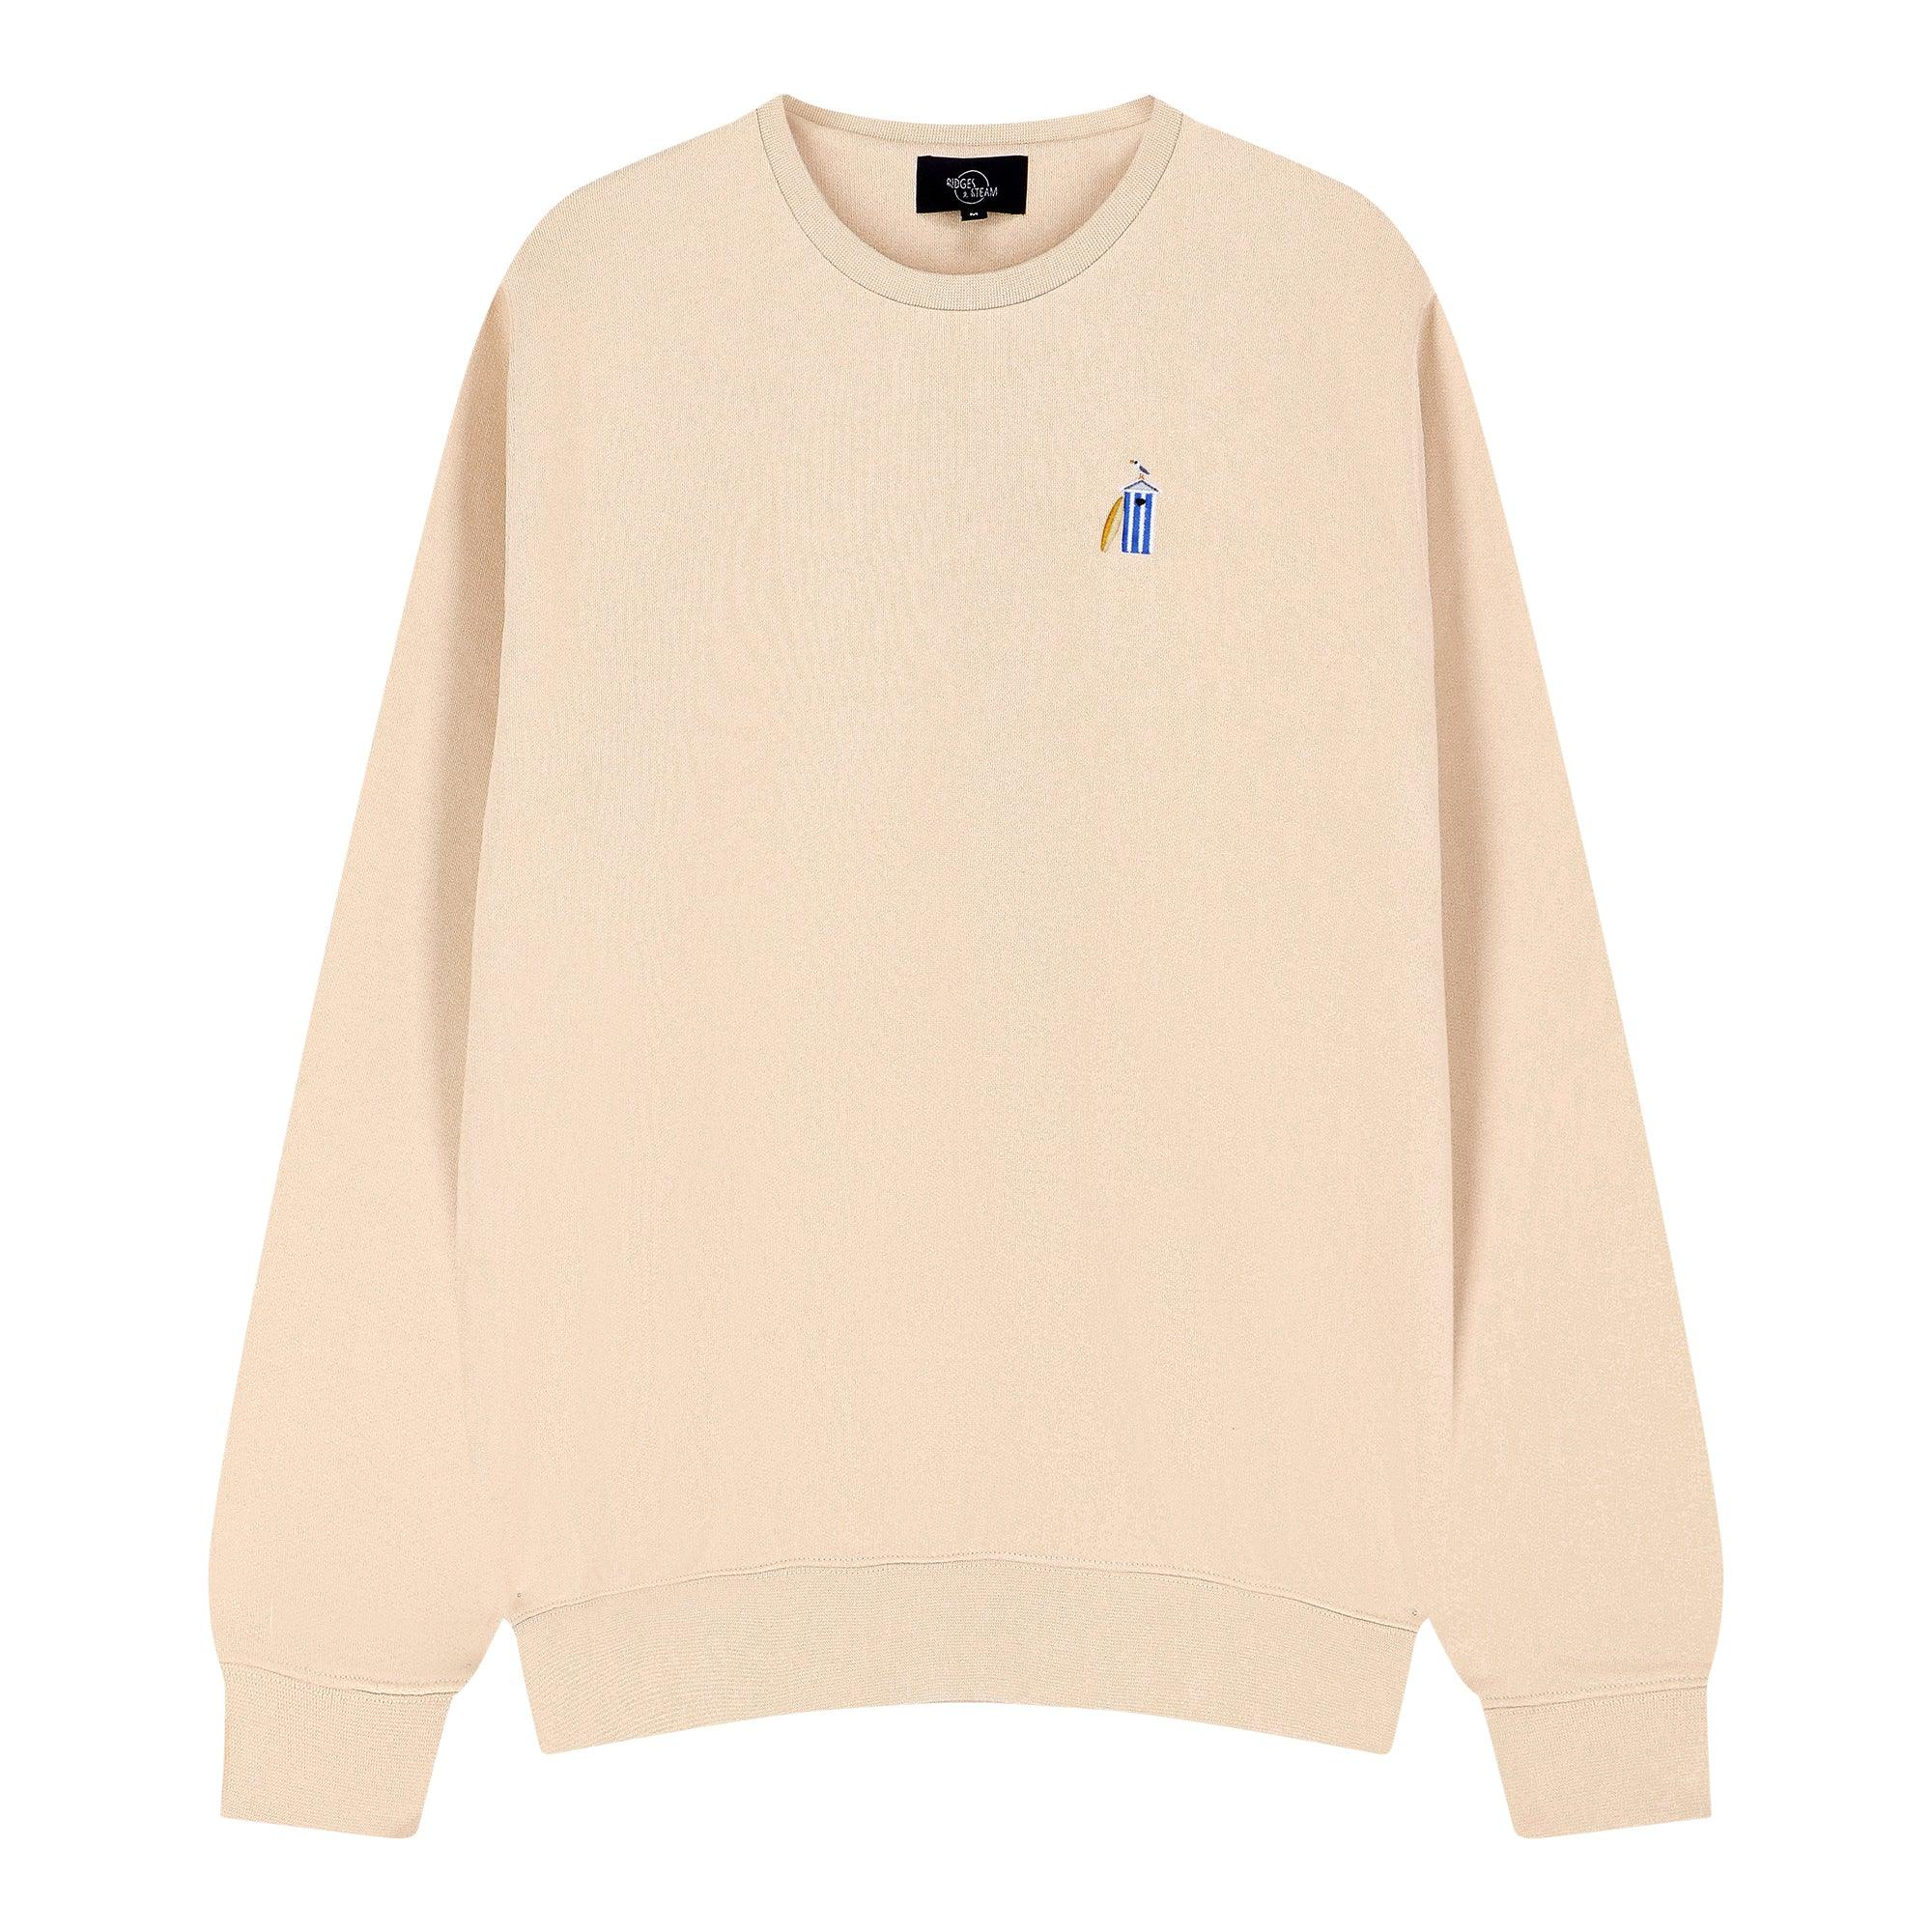 Unisex 'Take me to the sea' sweater - Beach house - beige - Ridges And Steam